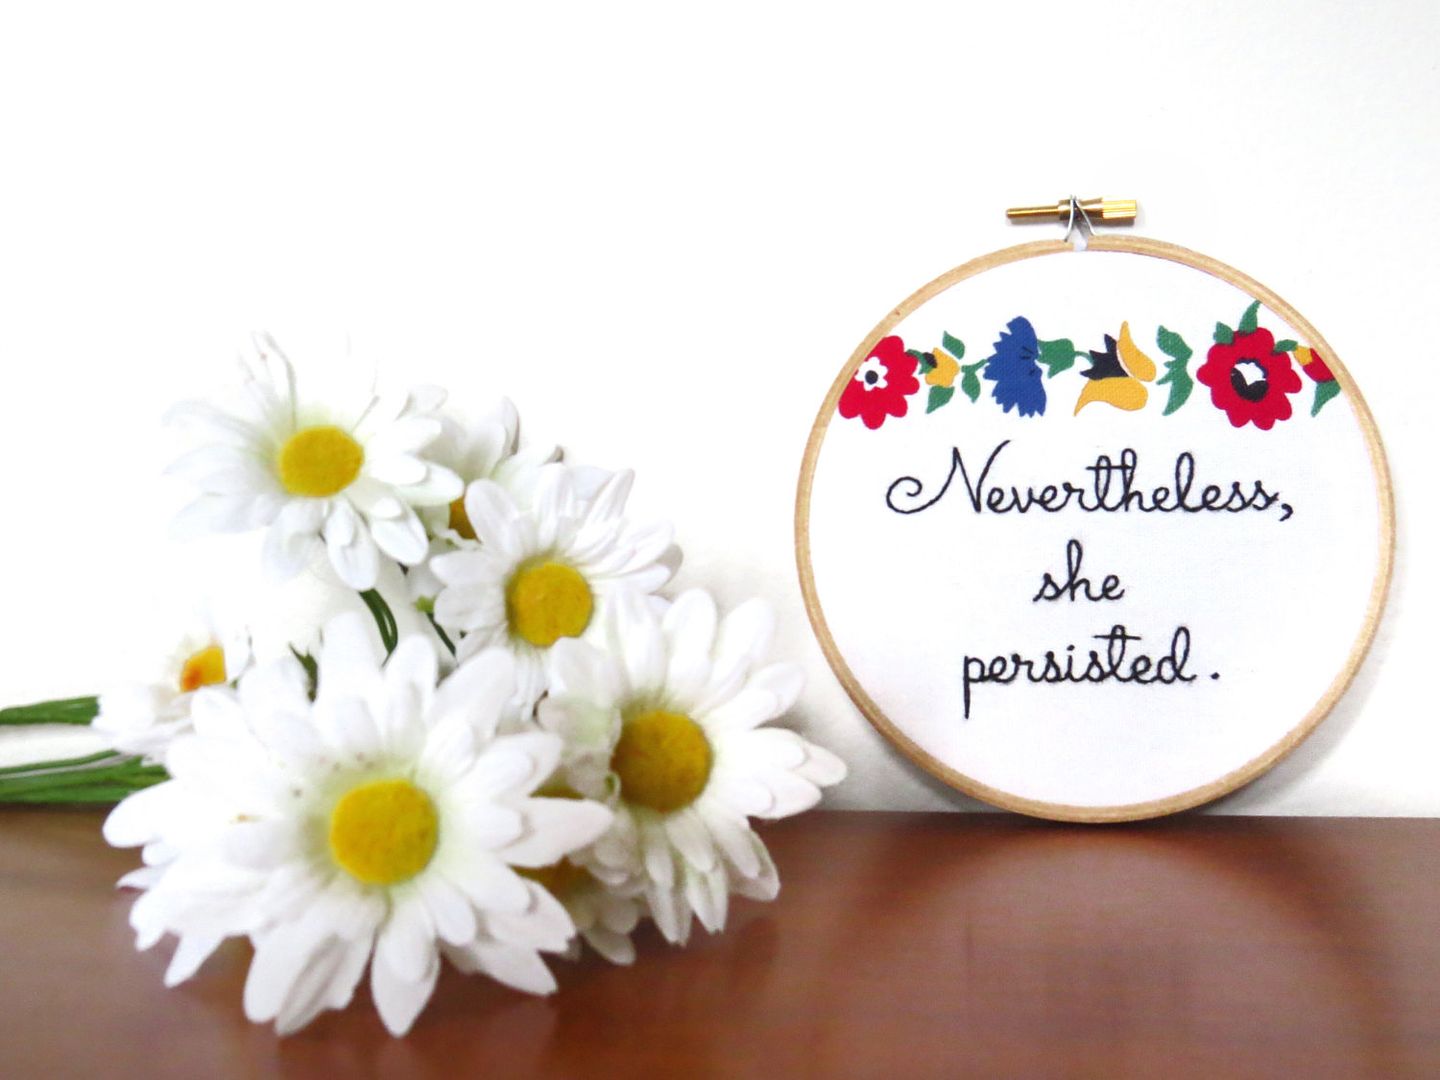 Feminist Mother's Day gifts: Nevertheless She Persisted Embroidery Hoop Wall Art from Knucklehead Art